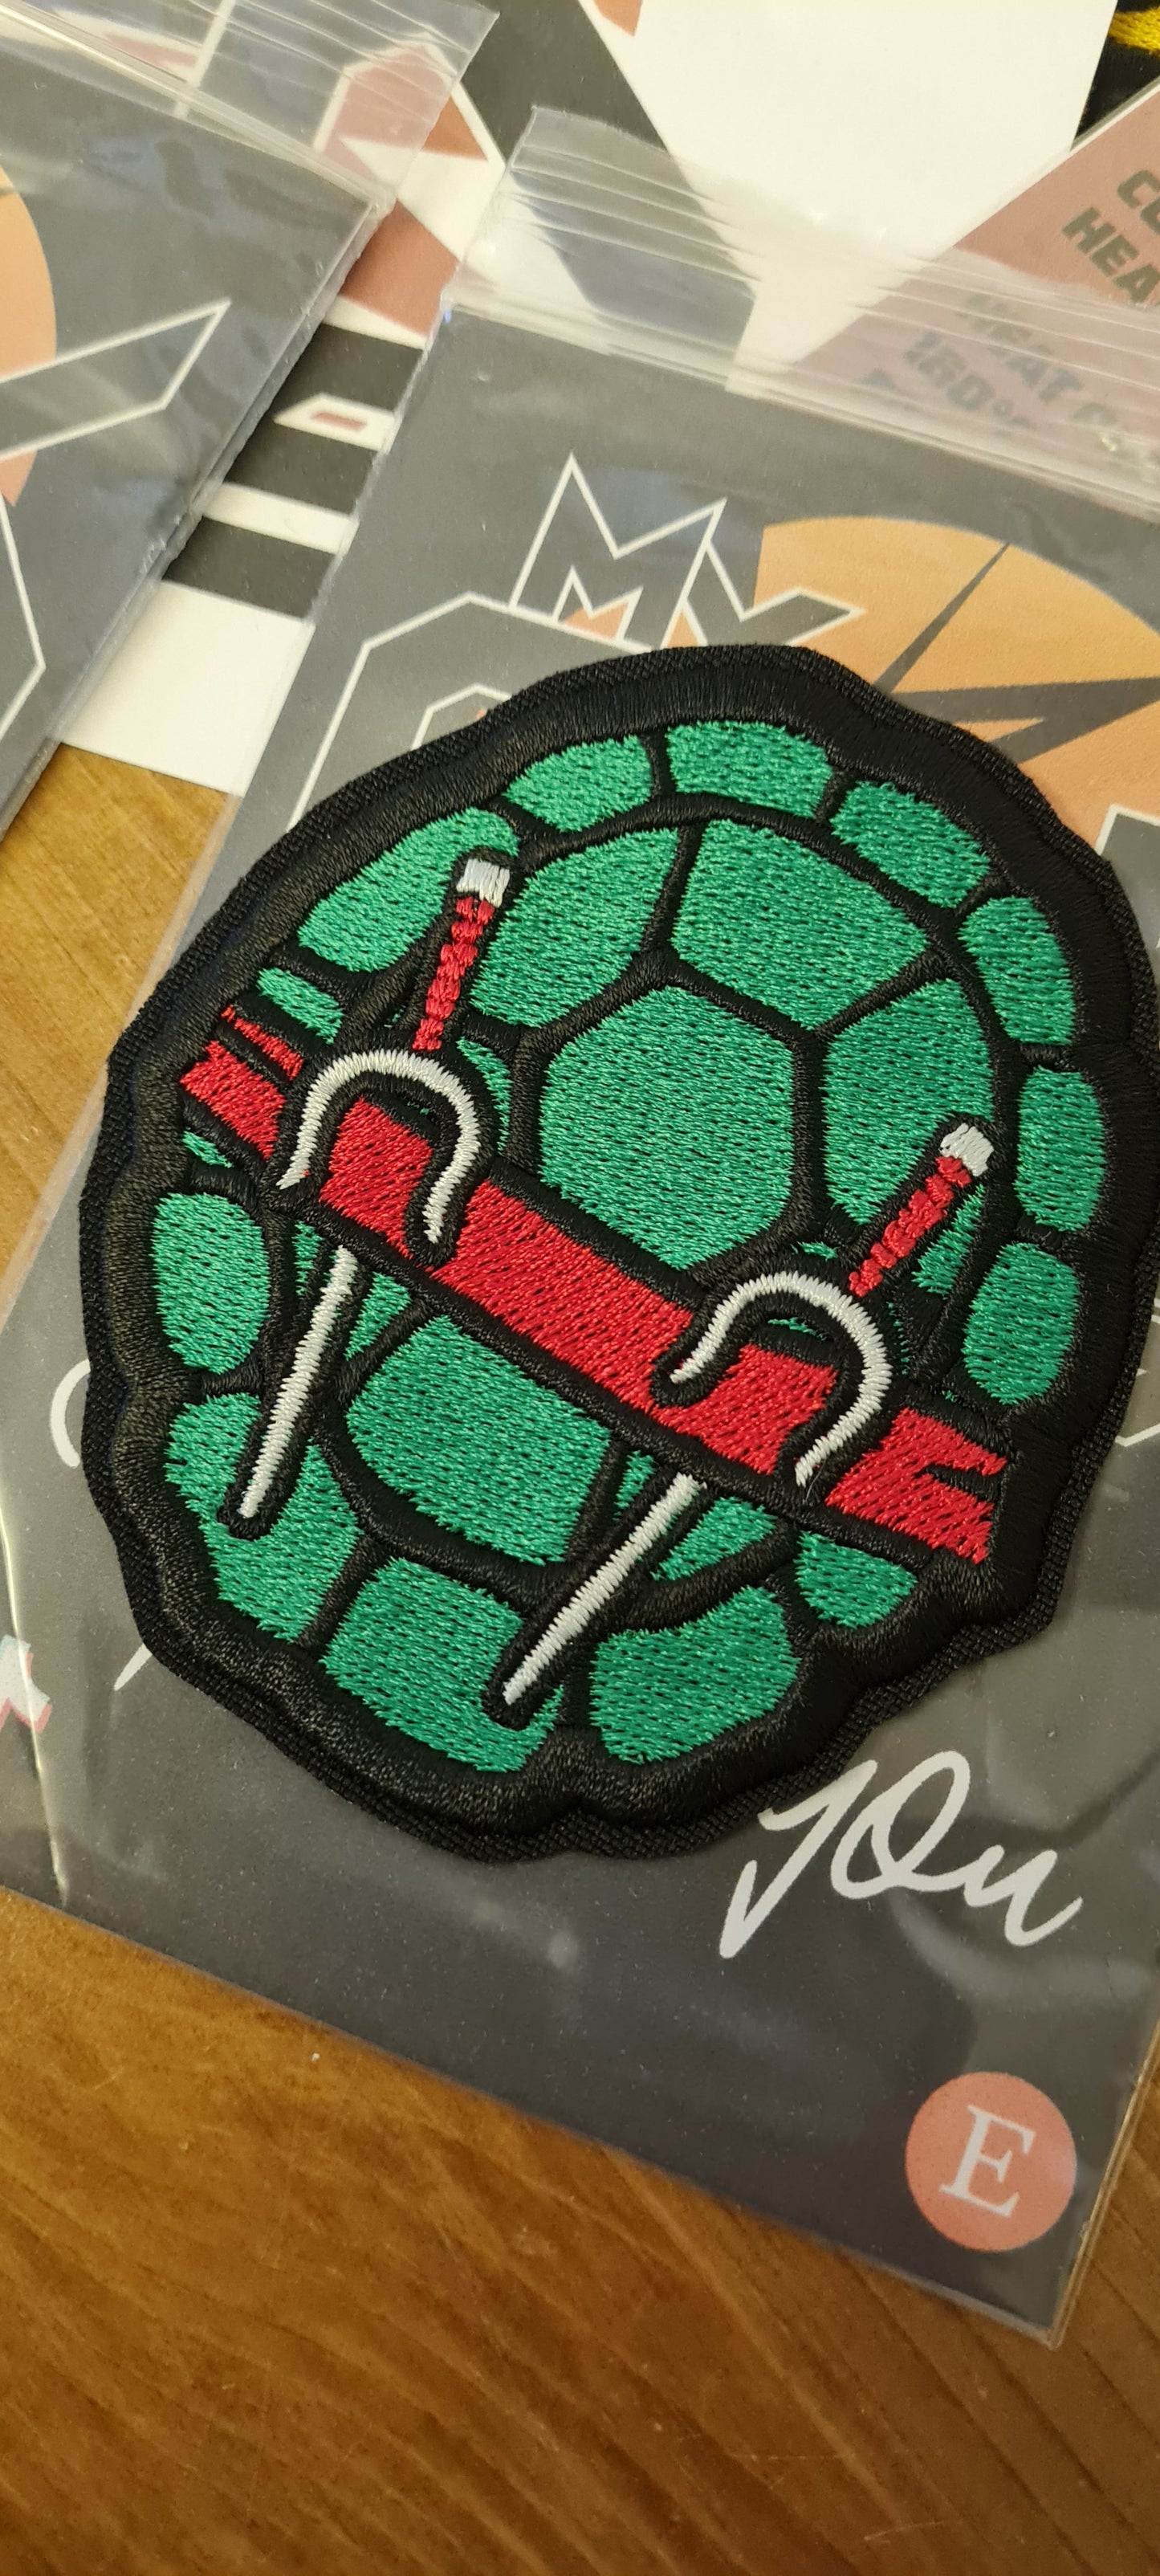 Teanage Mutant Ninja Turtles Patches, TMNT heat seal Patches.